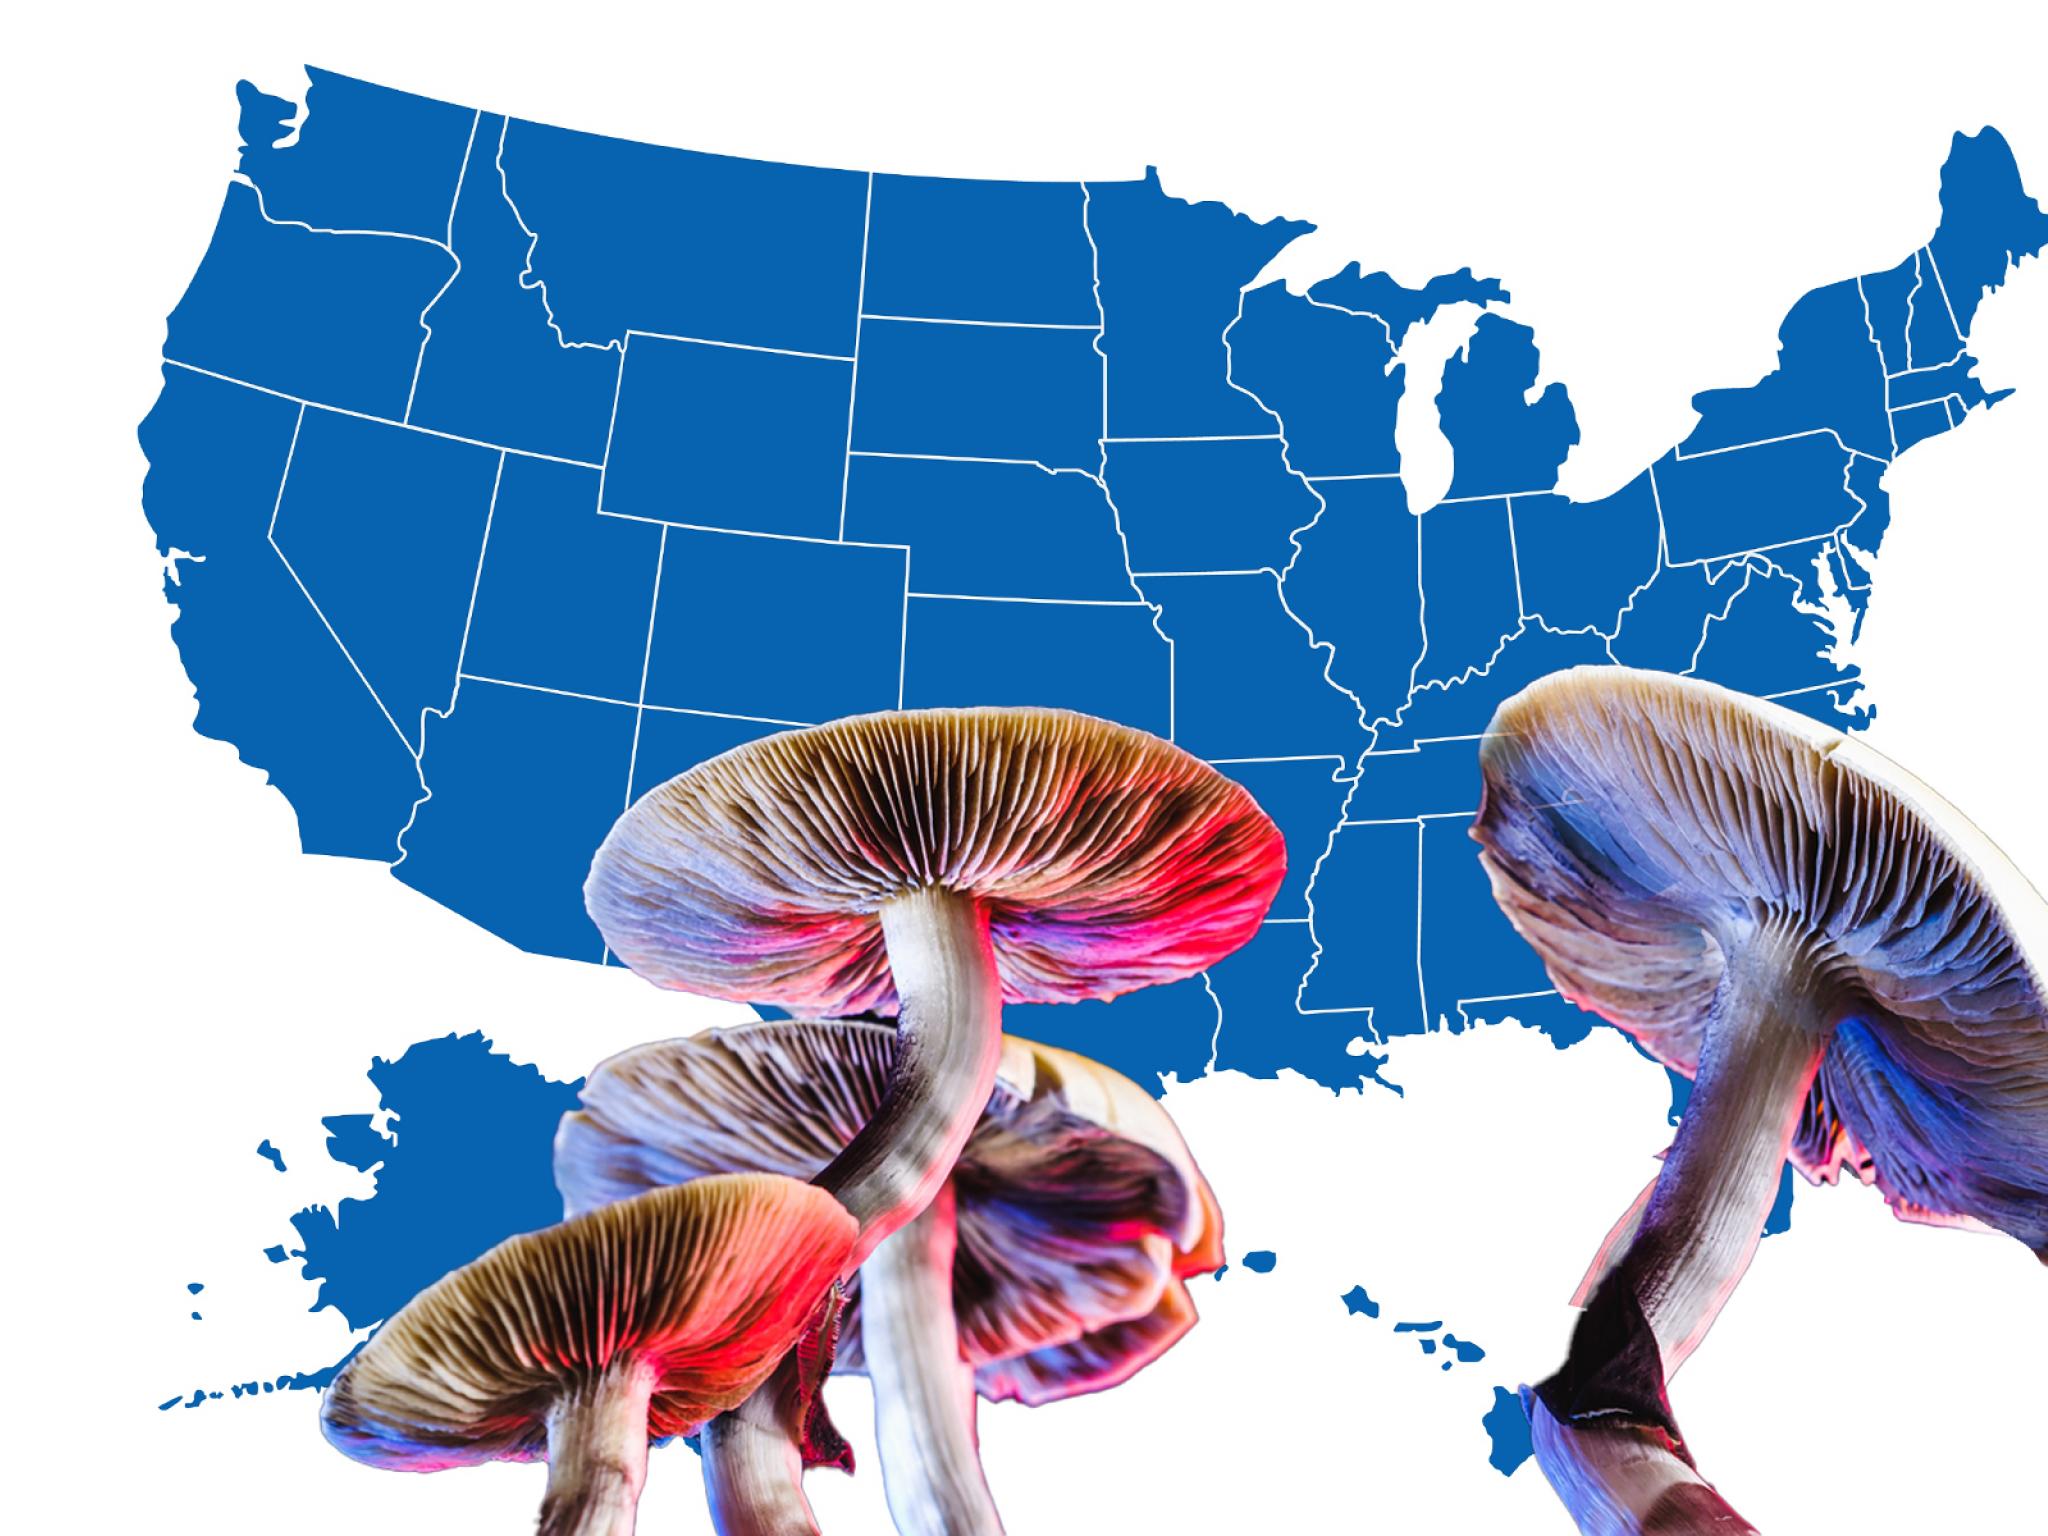  psychedelics-reform-update-latest-moves-in-9-of-22-states-with-existing-bills 